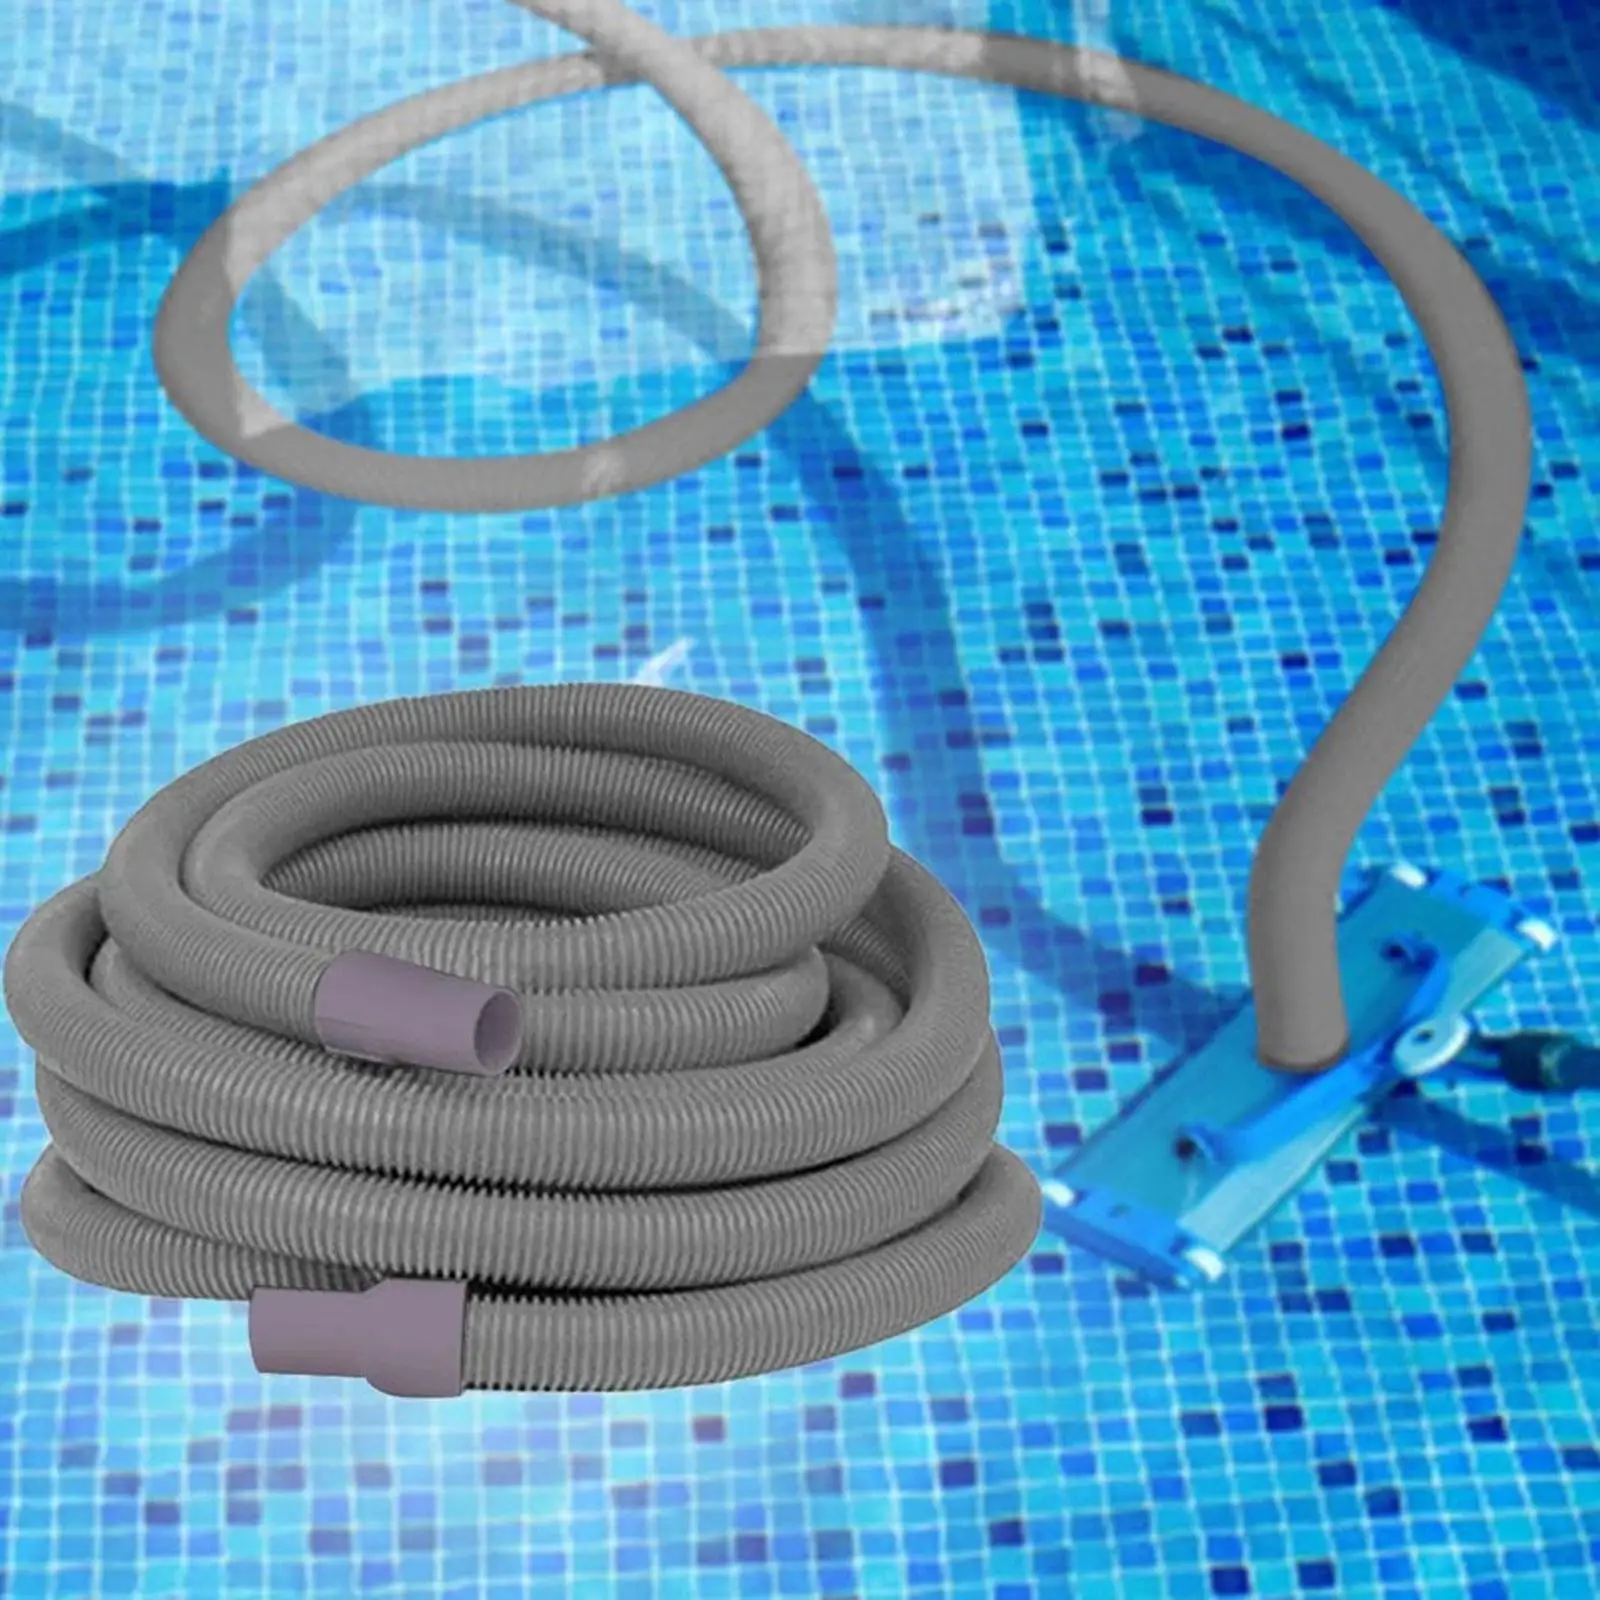 Heavy Duty Ground Pool Vacuum Hose with Swivel Cuff Durable for Pools